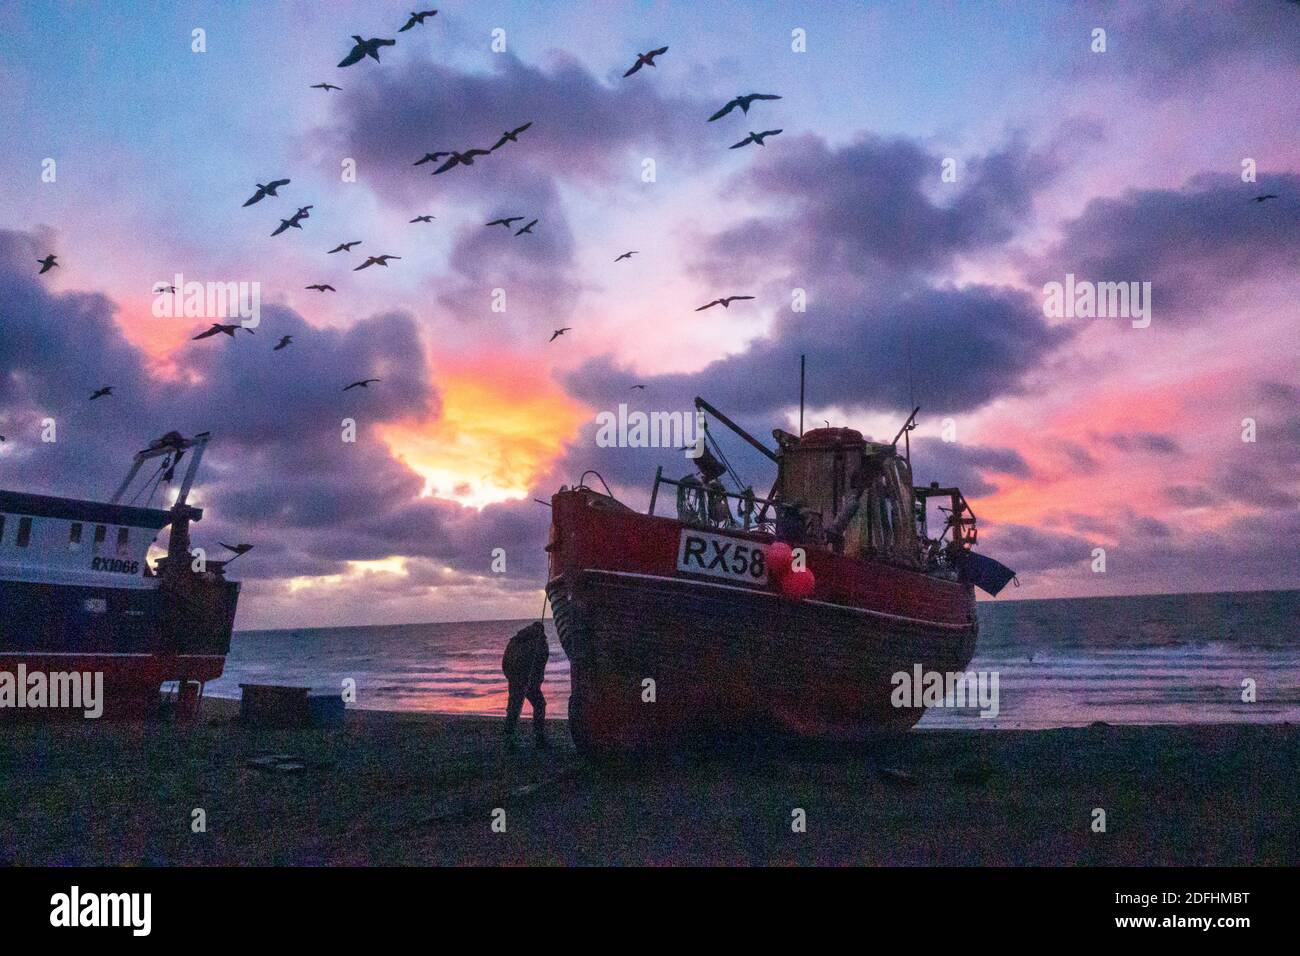 Hastings, East Sussex, UK. 5th December 2020. Seagulls swirl at dawn over Hastings fishing boats with a colourful sunrise over the English Channel, on the day of Boris Johnson's talks with EU President of European Commission, Ursula von der Leyen, to try to break the deadlock over fishing rights in British waters and secure a last minute trade deal. Carolyn Clarke/Alamy Live News. Winter sunrise Stock Photo